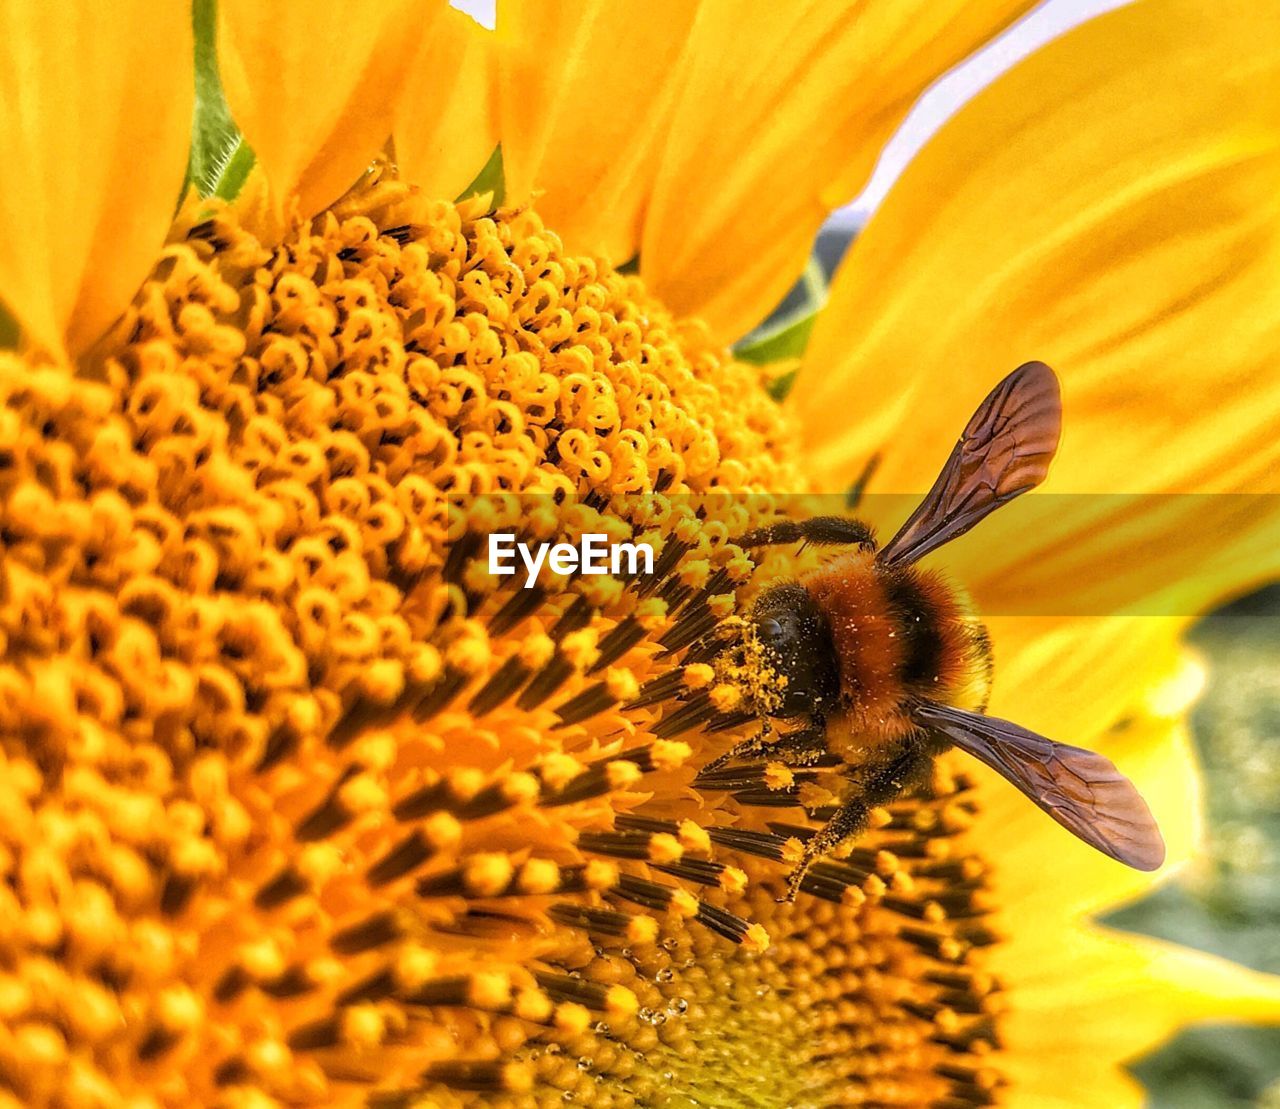 CLOSE-UP OF BEE POLLINATING ON SUNFLOWER